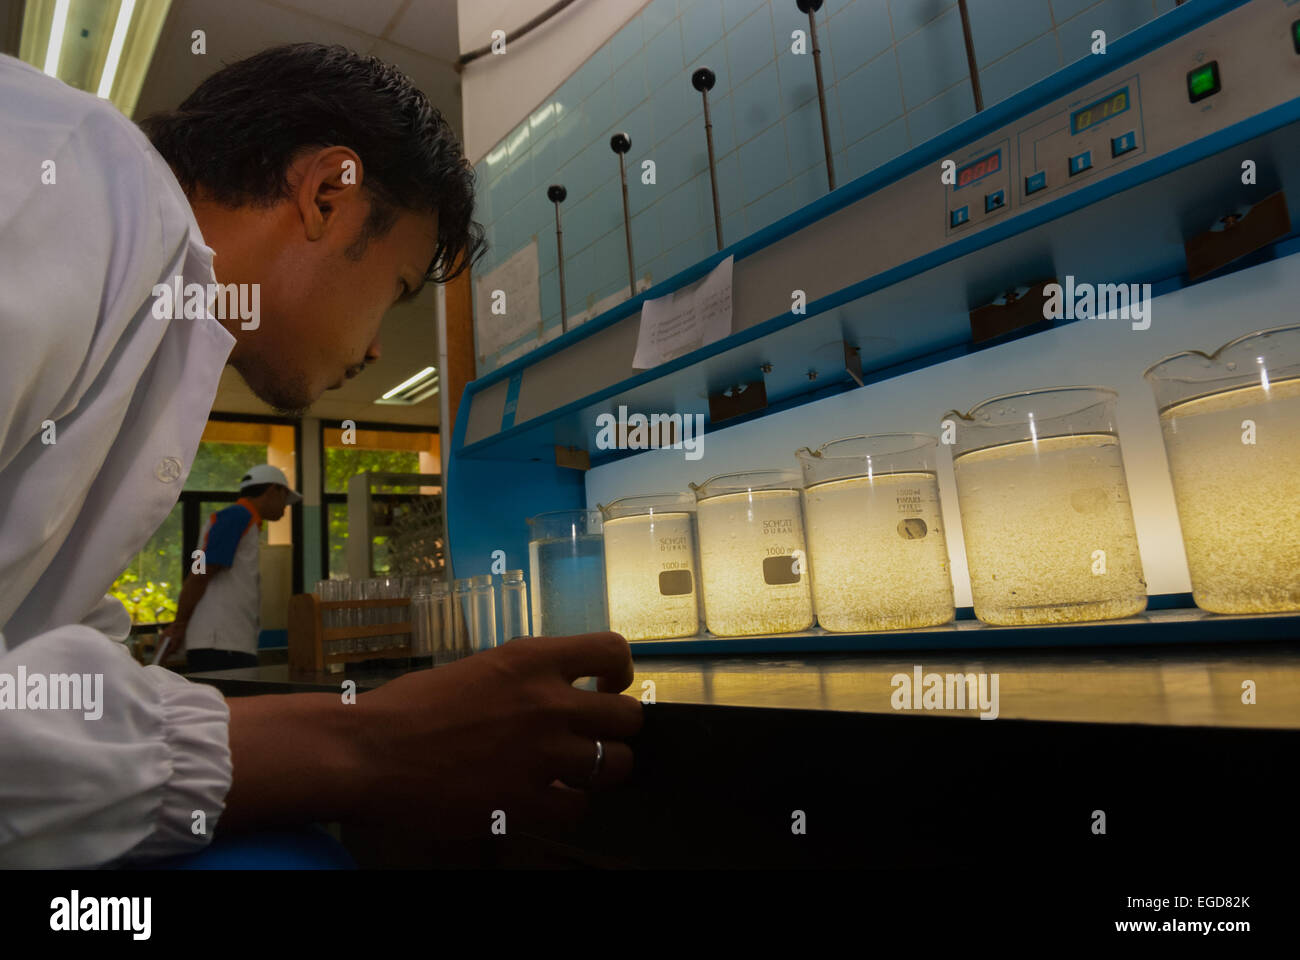 A scientist working on source water quality test lab operated by Aetra, one of Jakarta's water suppliers, in East Jakarta, Indonesia. Stock Photo